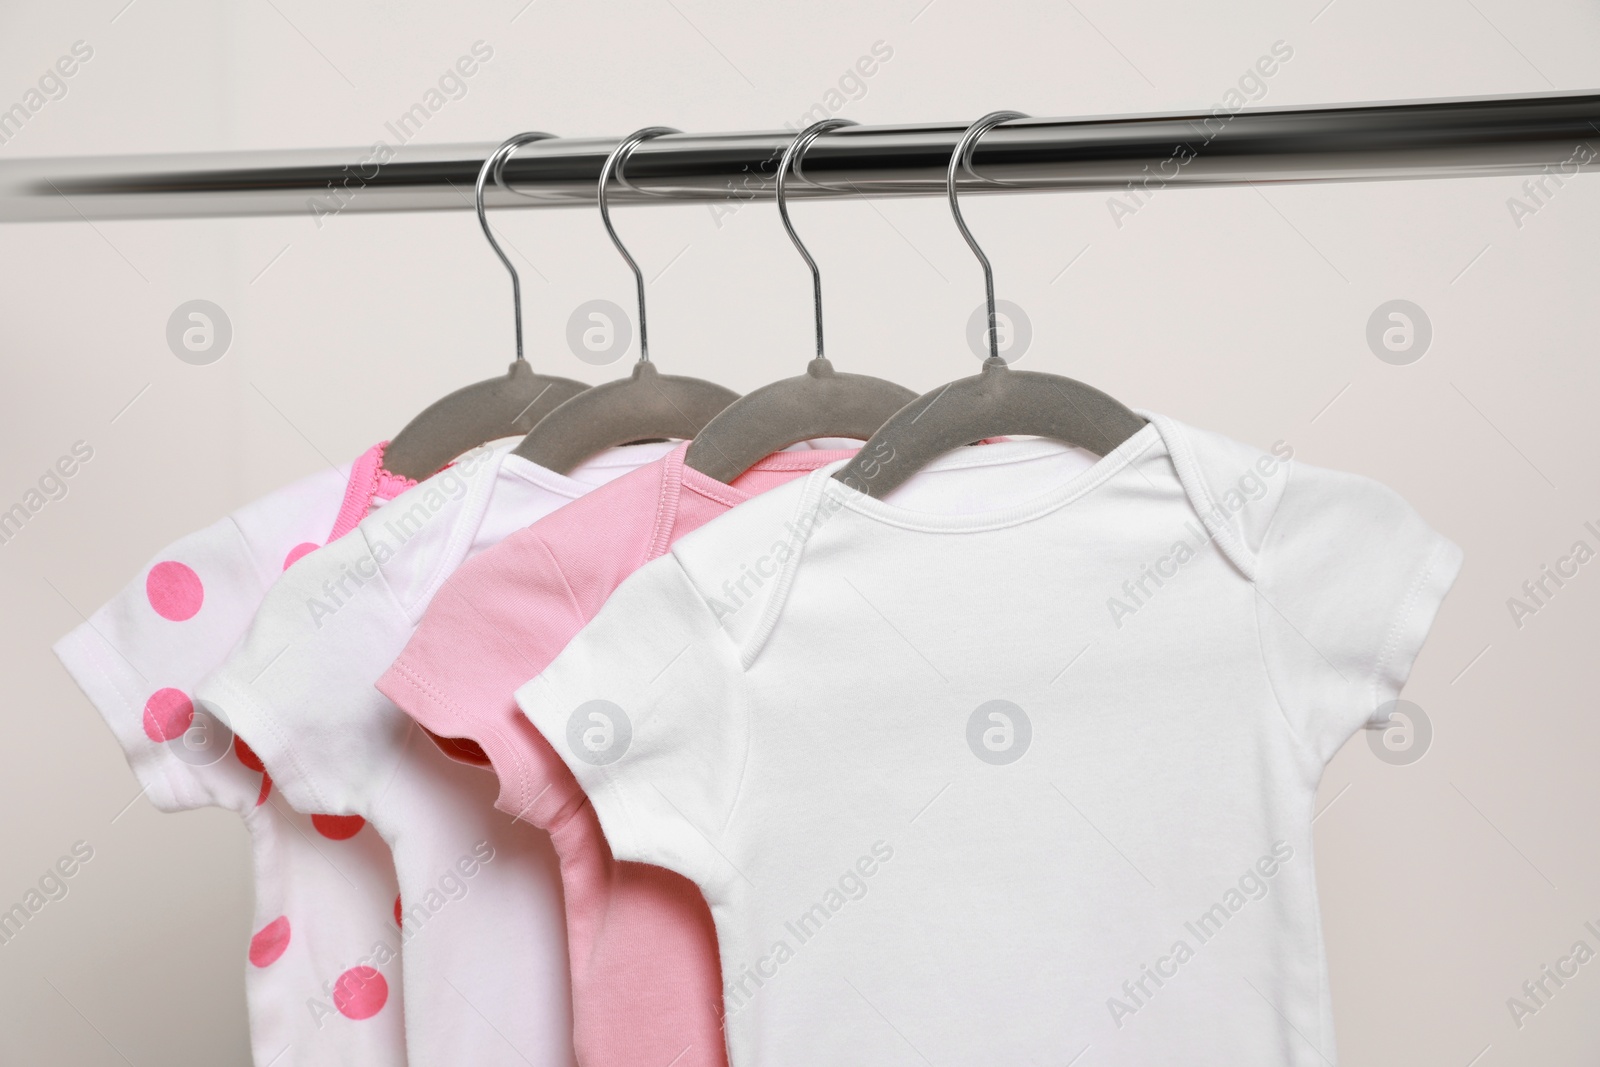 Photo of Baby bodysuits hanging on rack near white wall, closeup